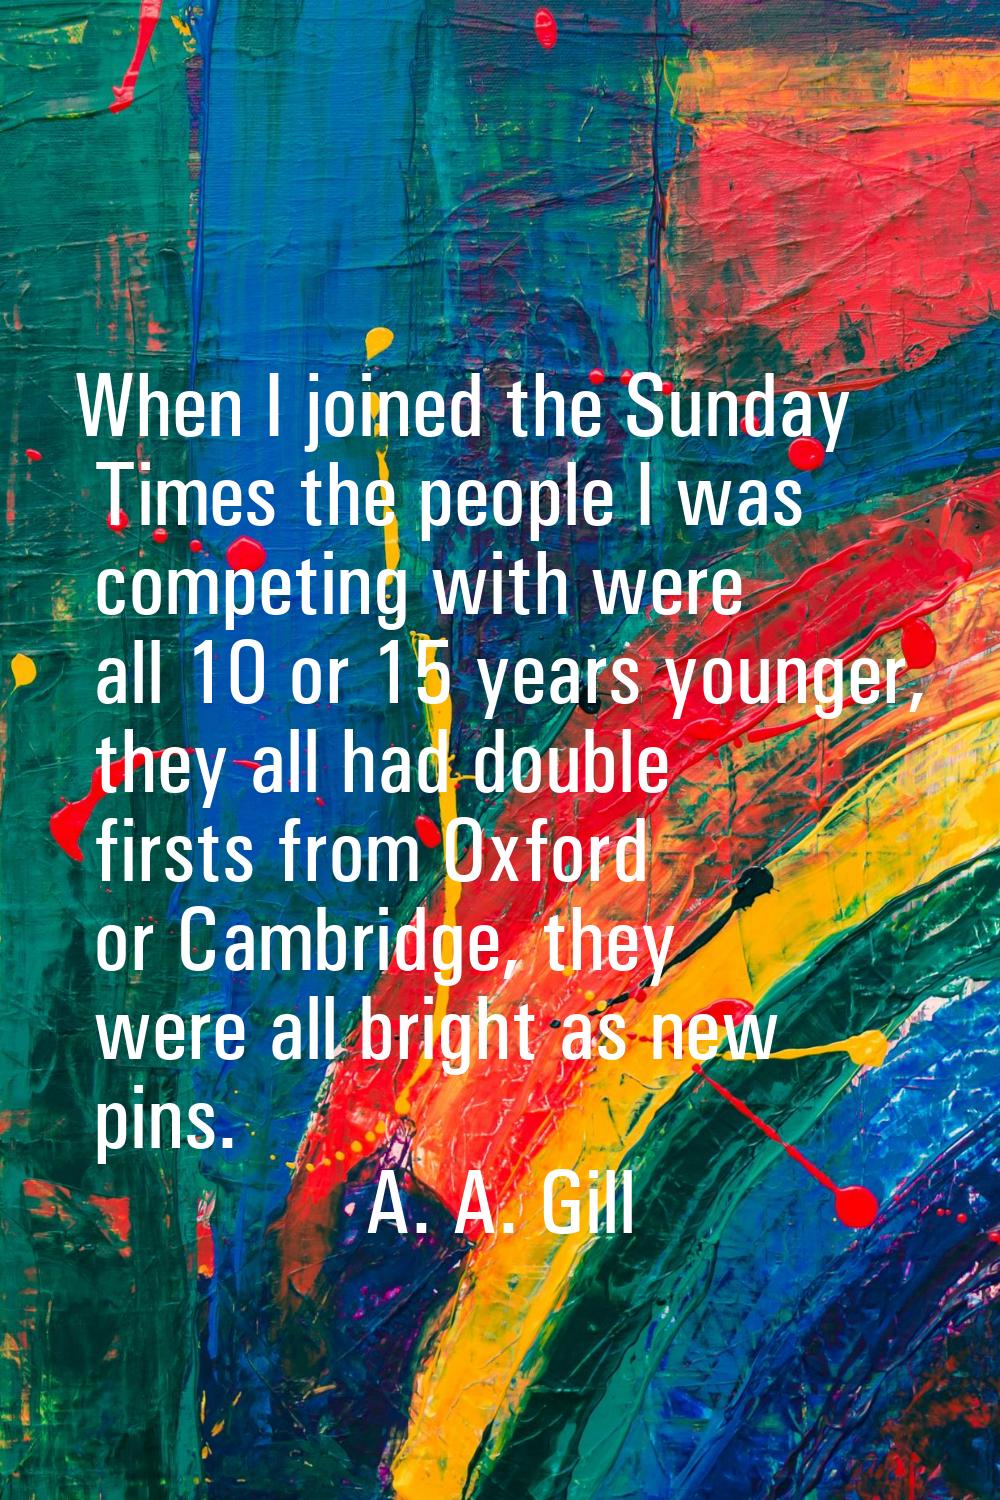 When I joined the Sunday Times the people I was competing with were all 10 or 15 years younger, the